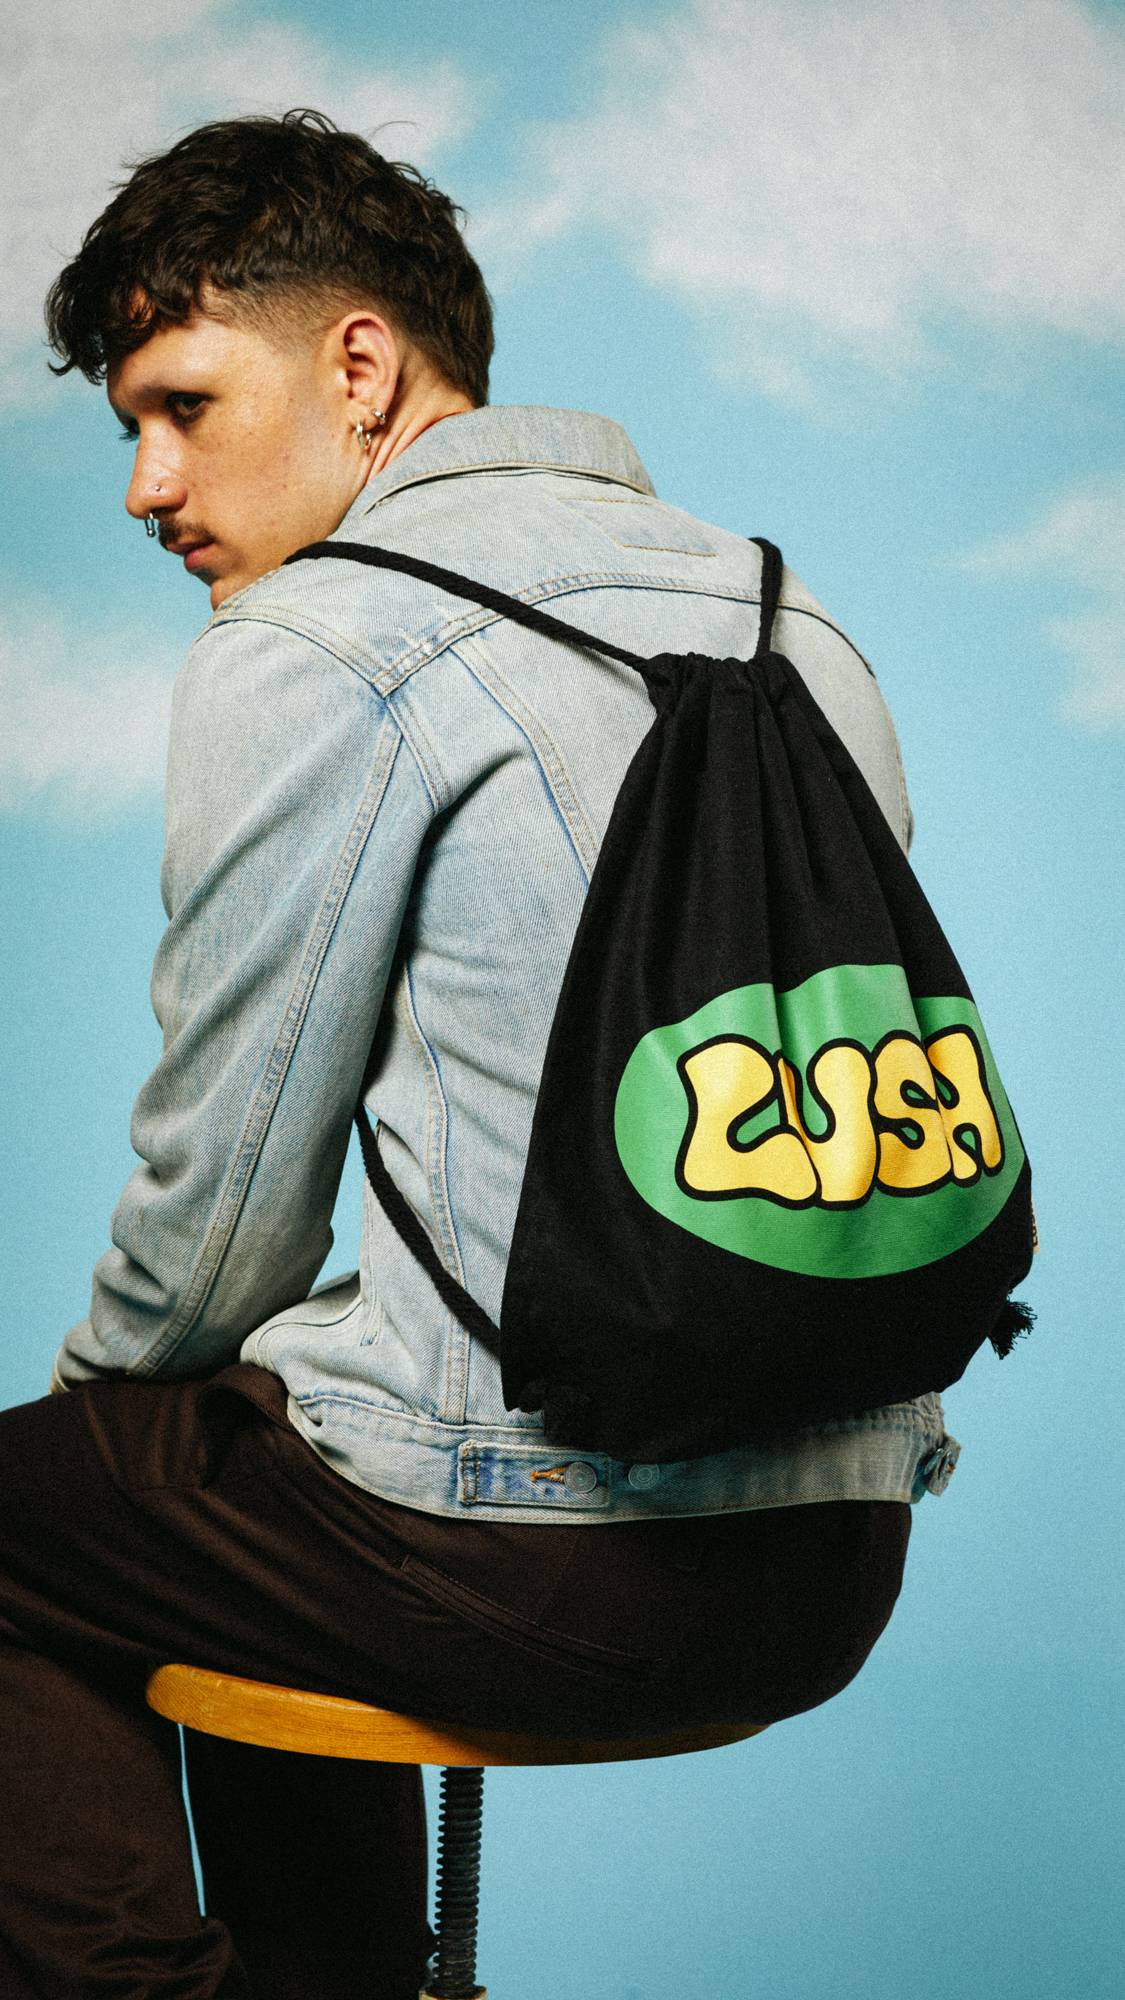 Model in on a sky-like background wearing a denim jacket, sitting on a stool wearing the Retro Bubble drawstring bag.